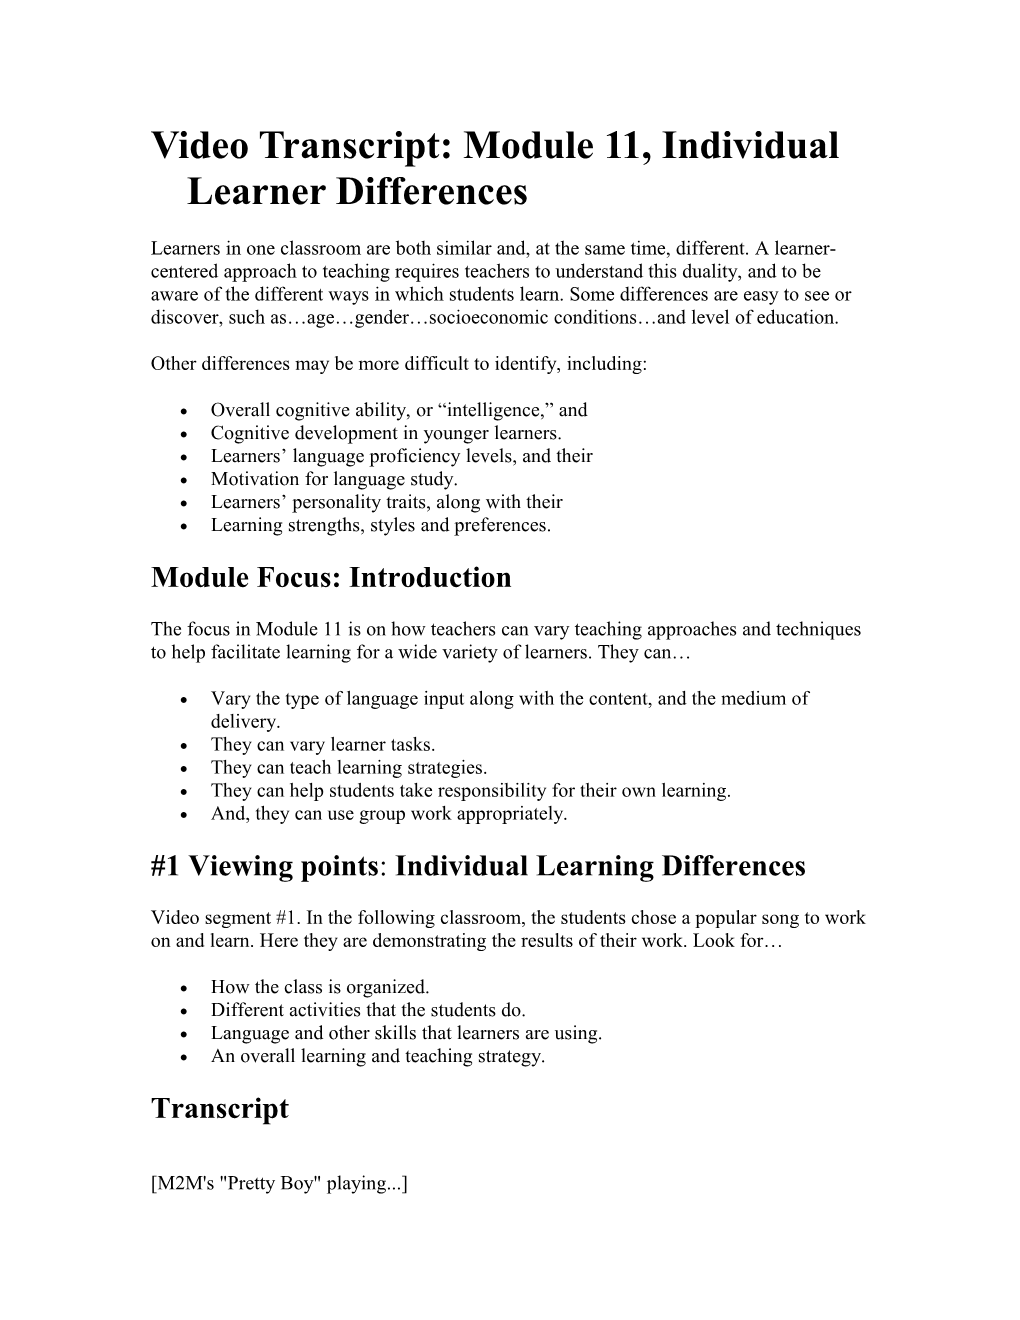 Video Transcript: Module 11, Individual Learner Differences